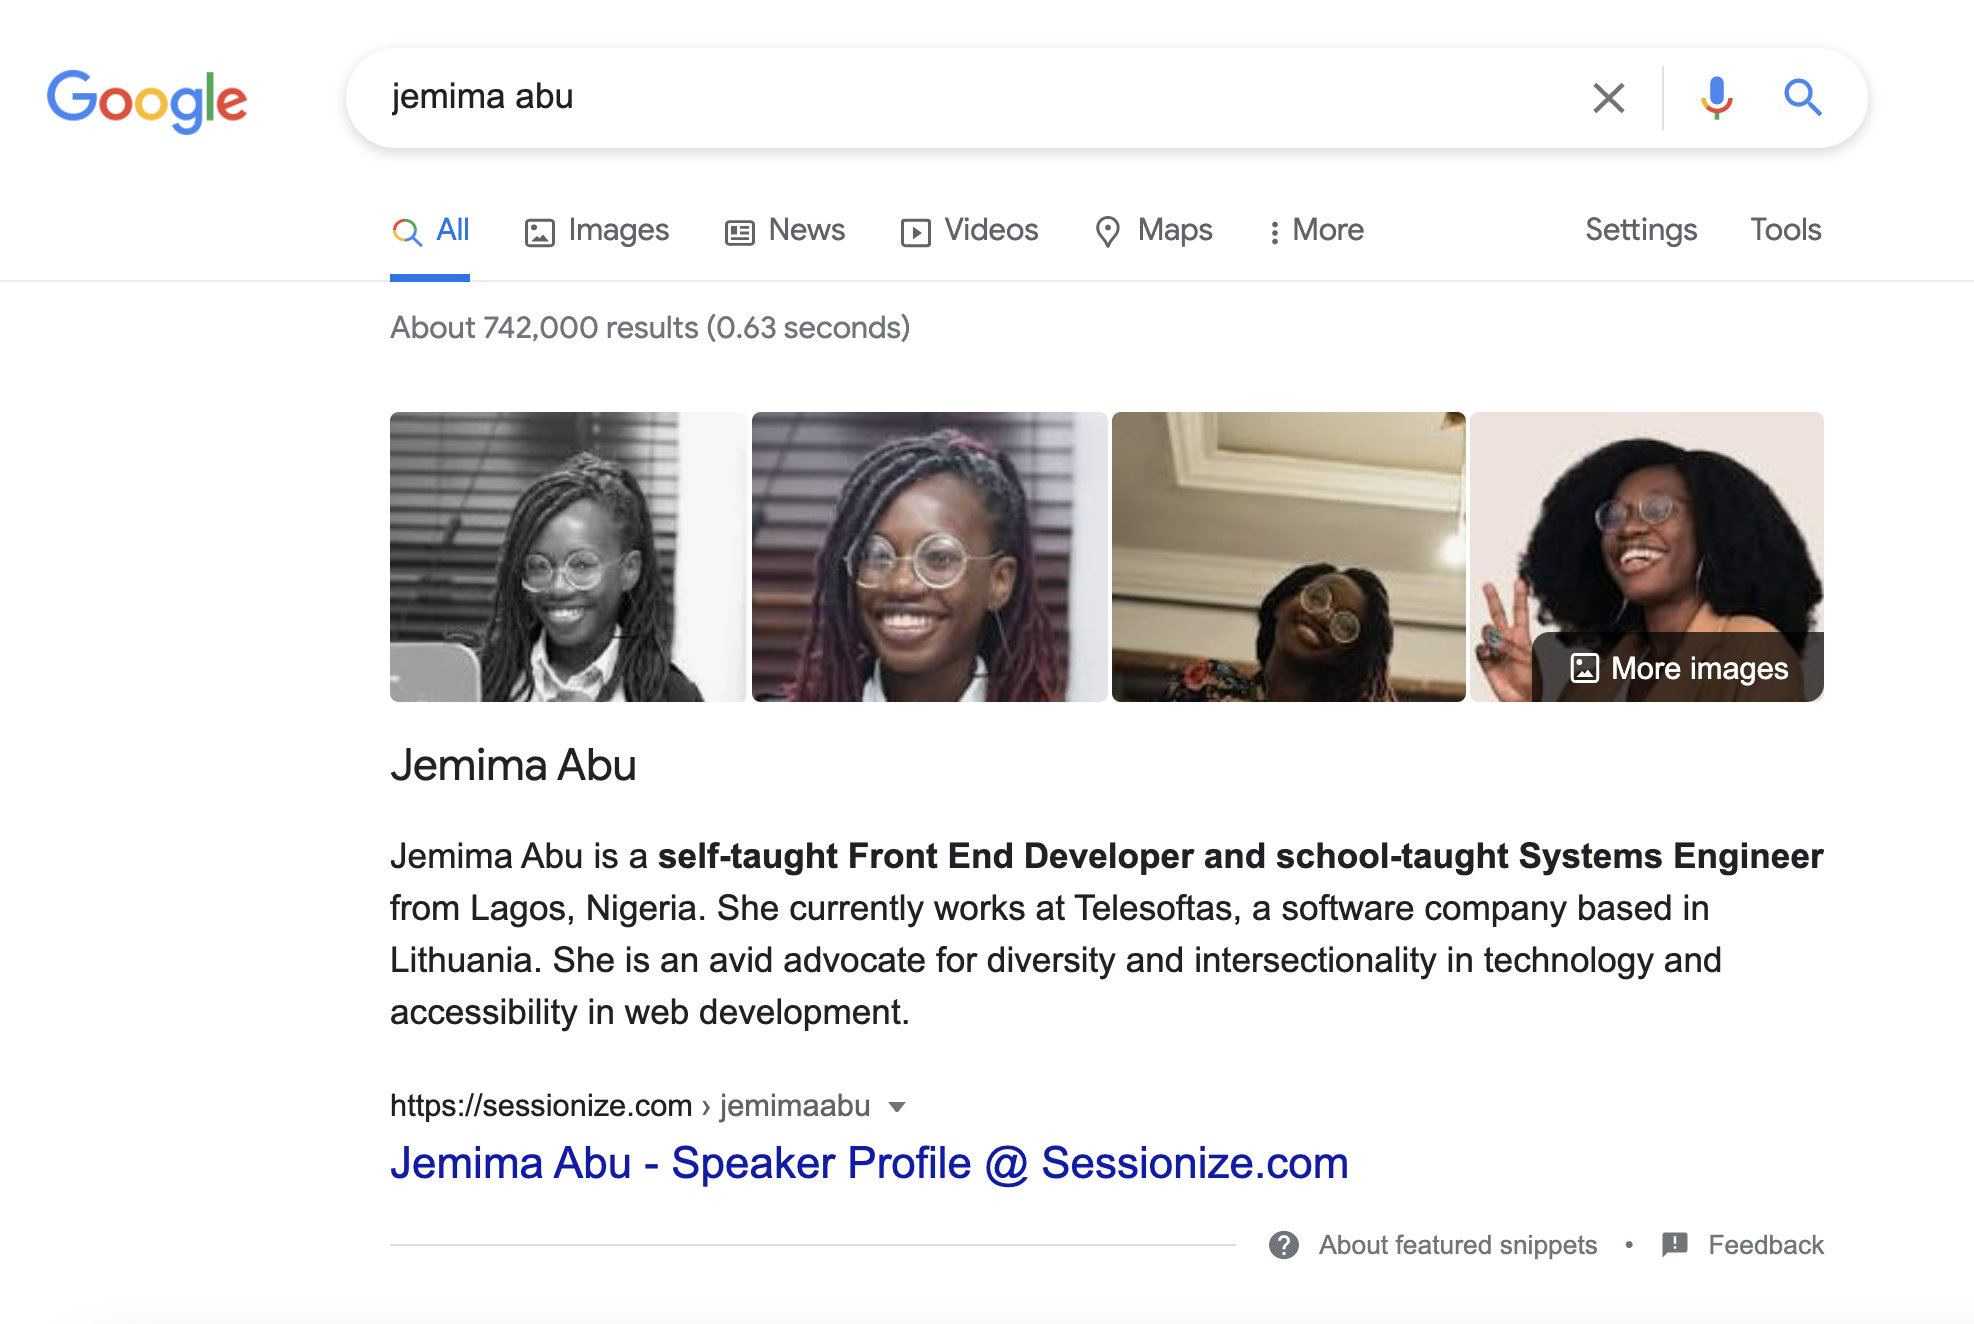 Search results for jemima abu on google